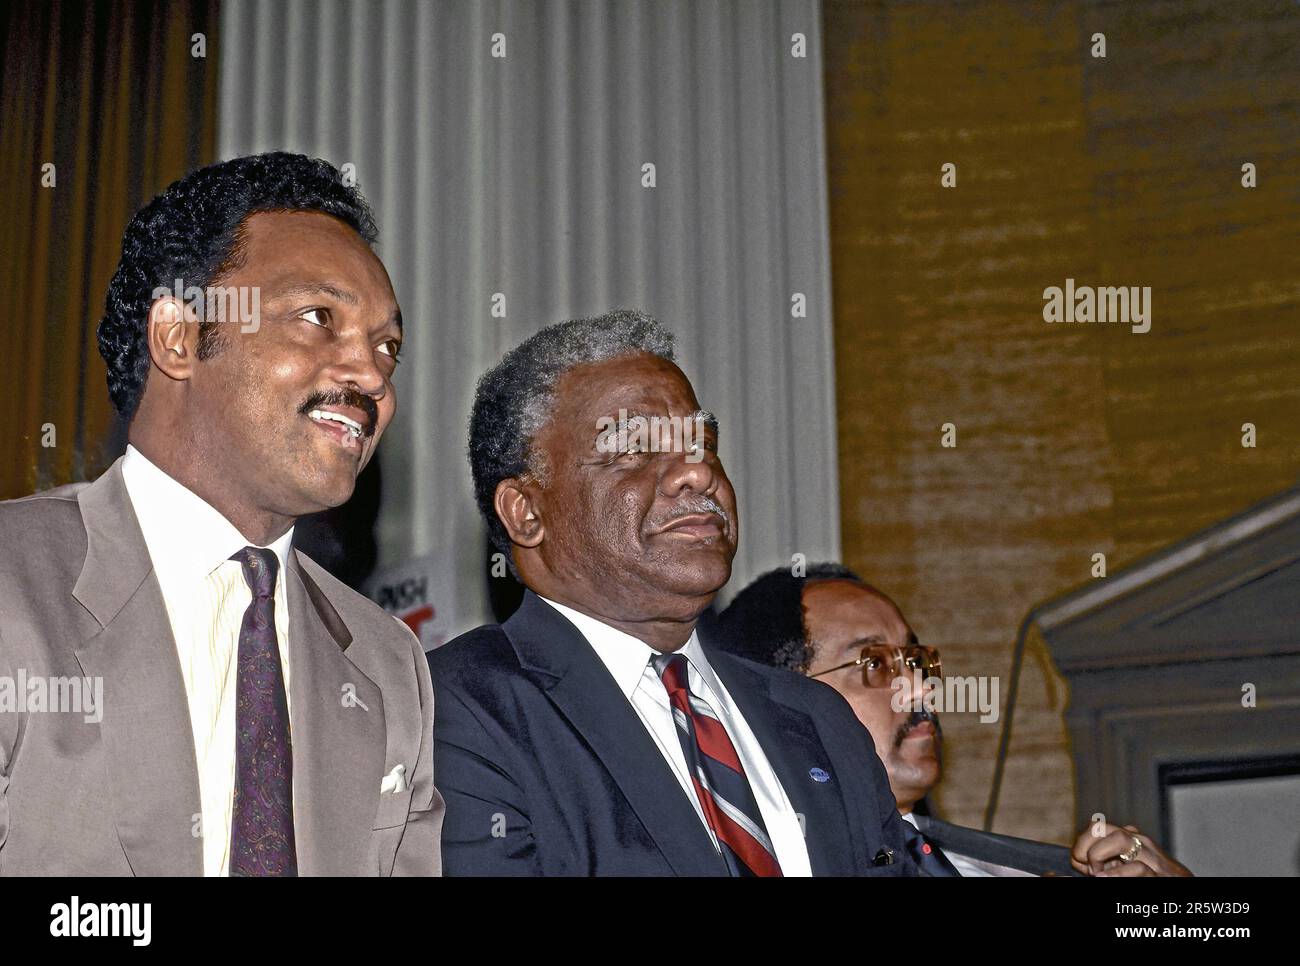 CHICAGO, ILLINOIS - FEBRUARY 24, 1987 Reverend Jesse Jackson sits next to incumbent Chicago Mayor Harold Washington at his primary election victory celebration over Jane Byrne thus winning the Democratic nomination for mayor which he easily won reelection in the general election the following November. On November 25 Washington suffered a fatal heart attack in his office and died at age 65. Stock Photo